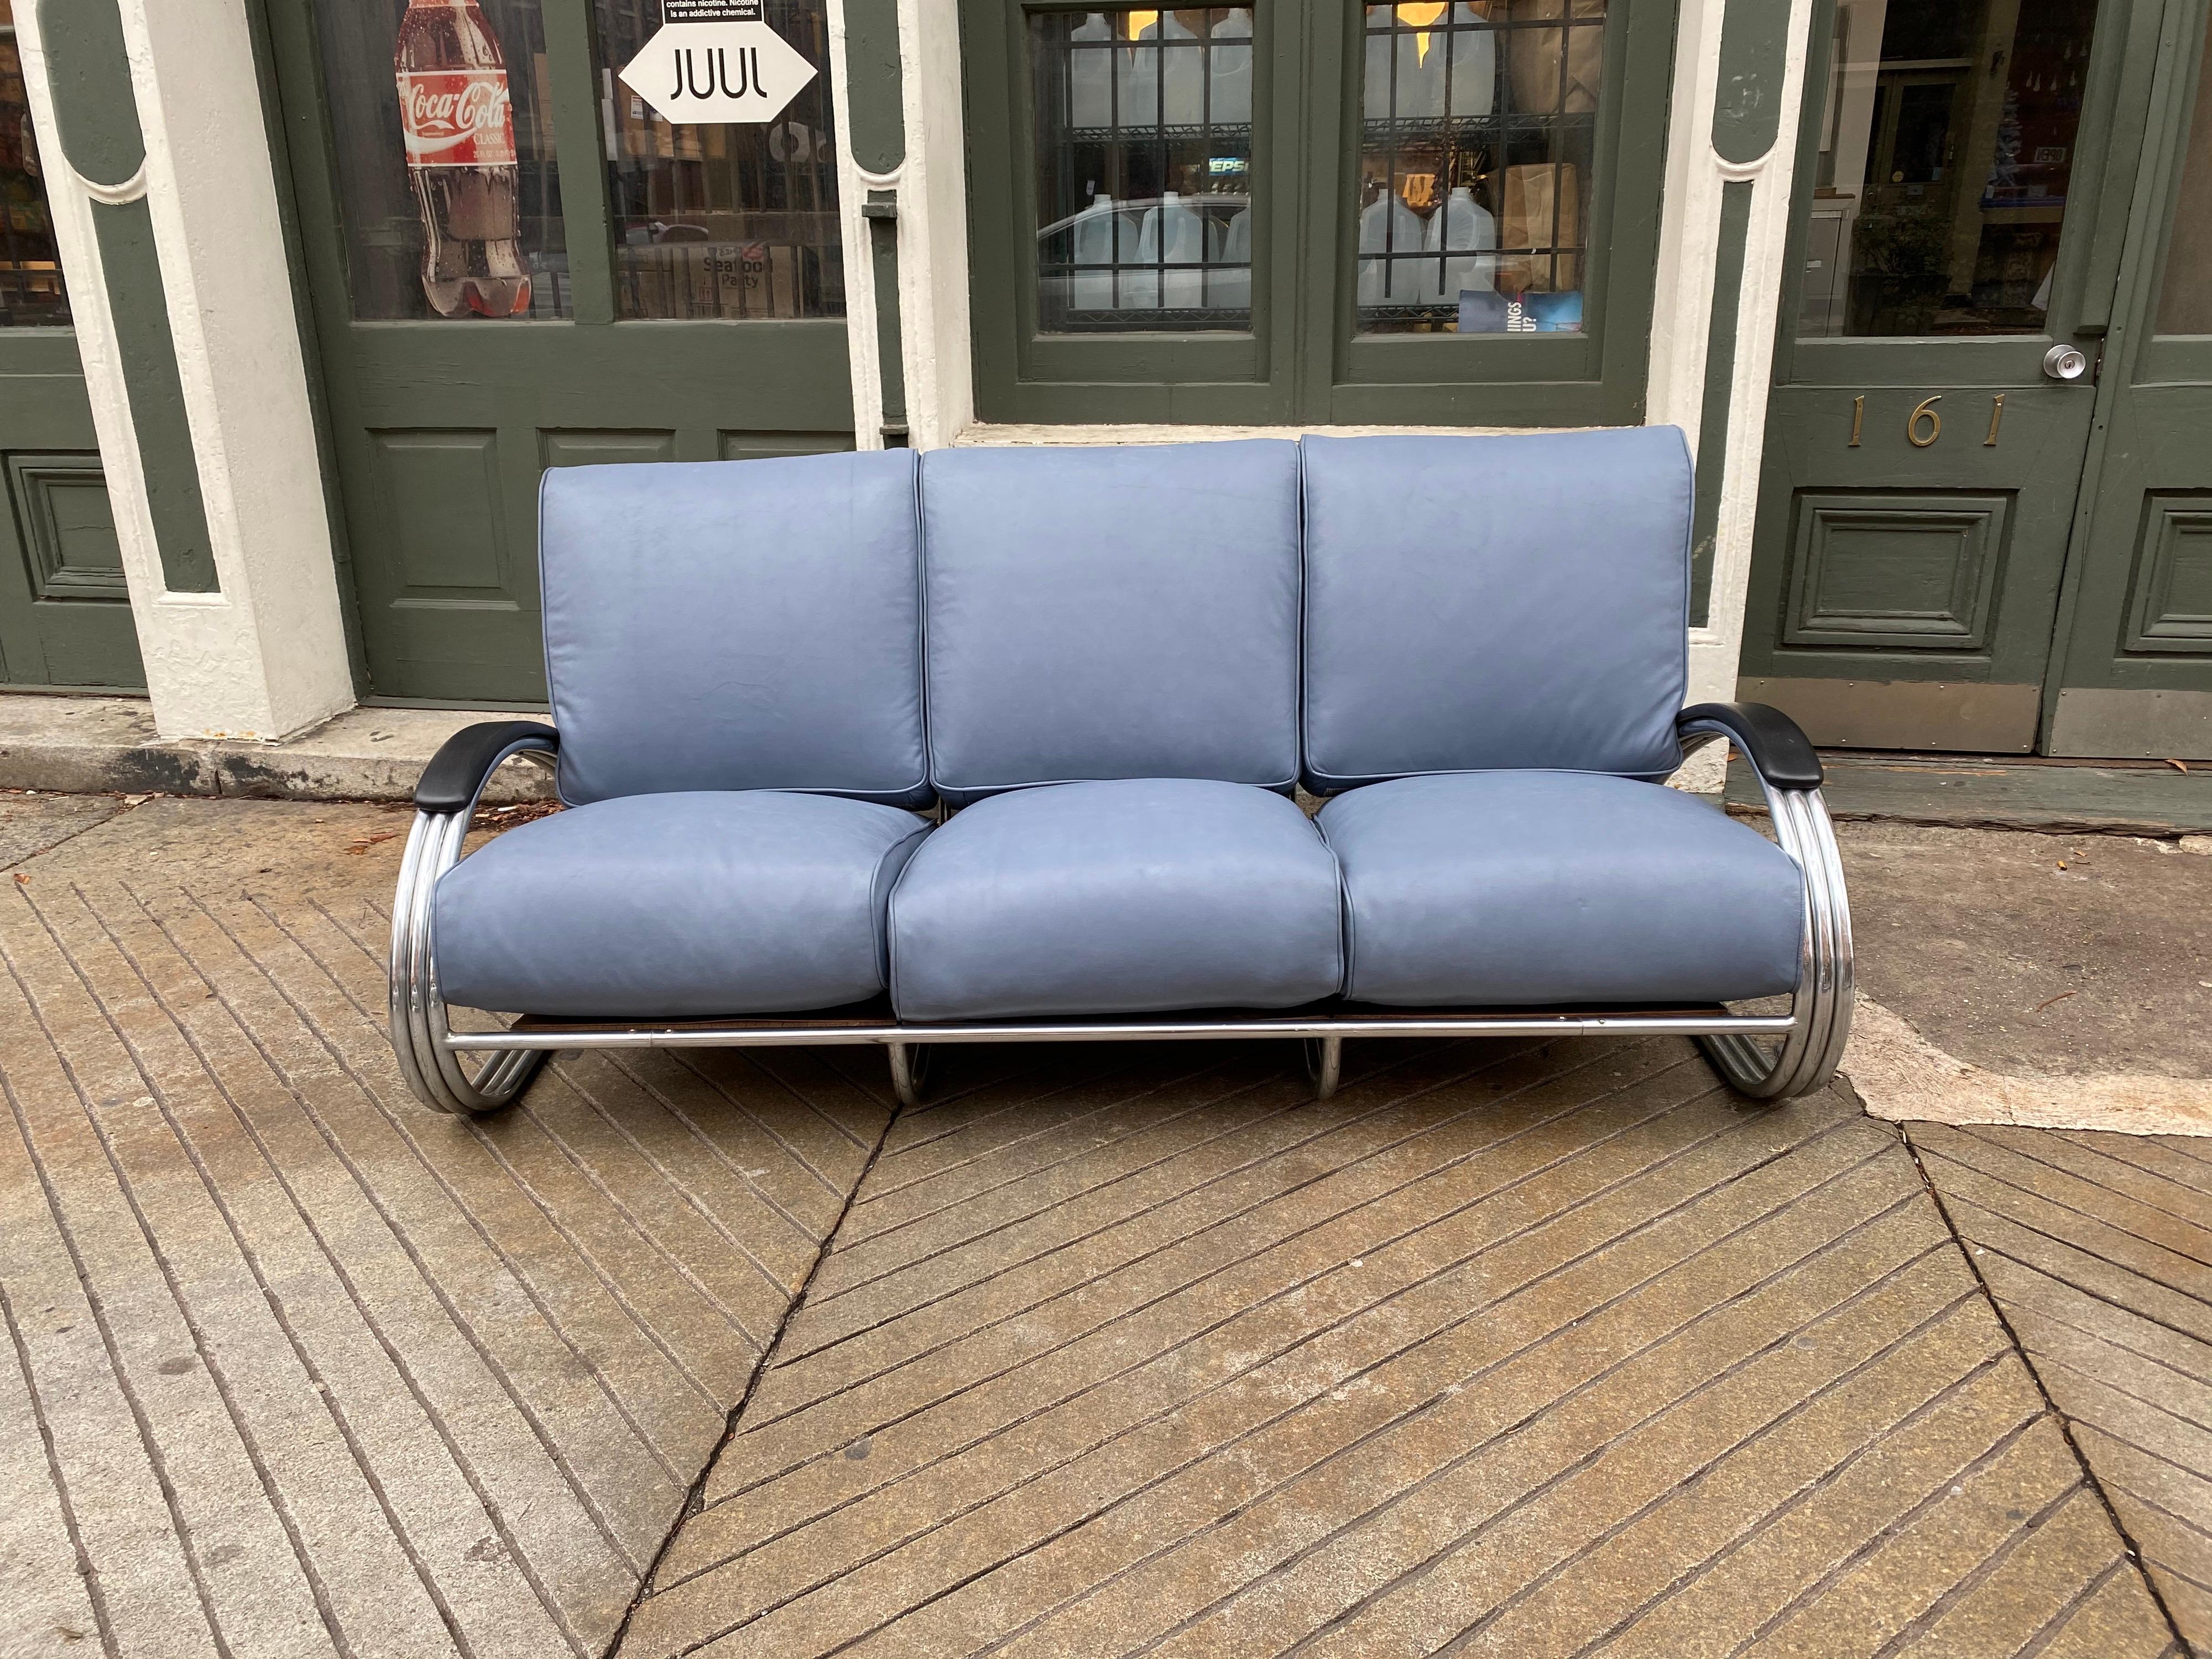 KEM Weber for Lloyd Chrome triple band Machine Age sofa. One of the most iconic streamline modern pieces out there! The promise of speed! Newly reupholstered in a light blue/gray leather. All inner springs re-tied and present. Great pains to reuse